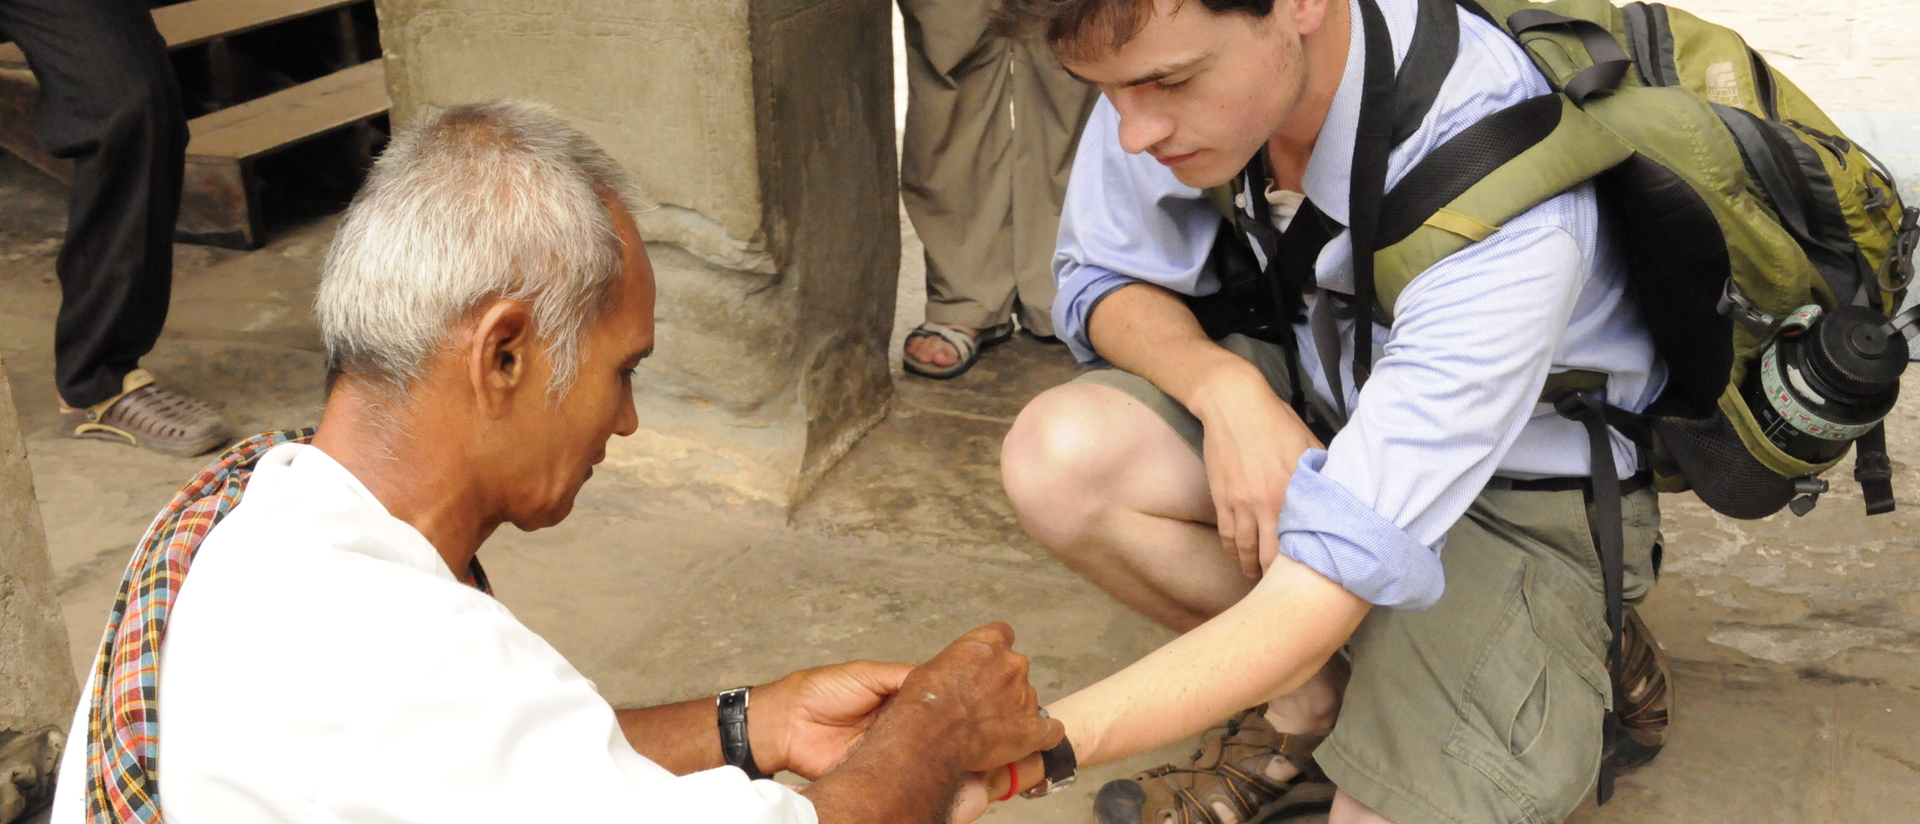 UW-Eau Claire student researcher interacting with Cambodian citizen